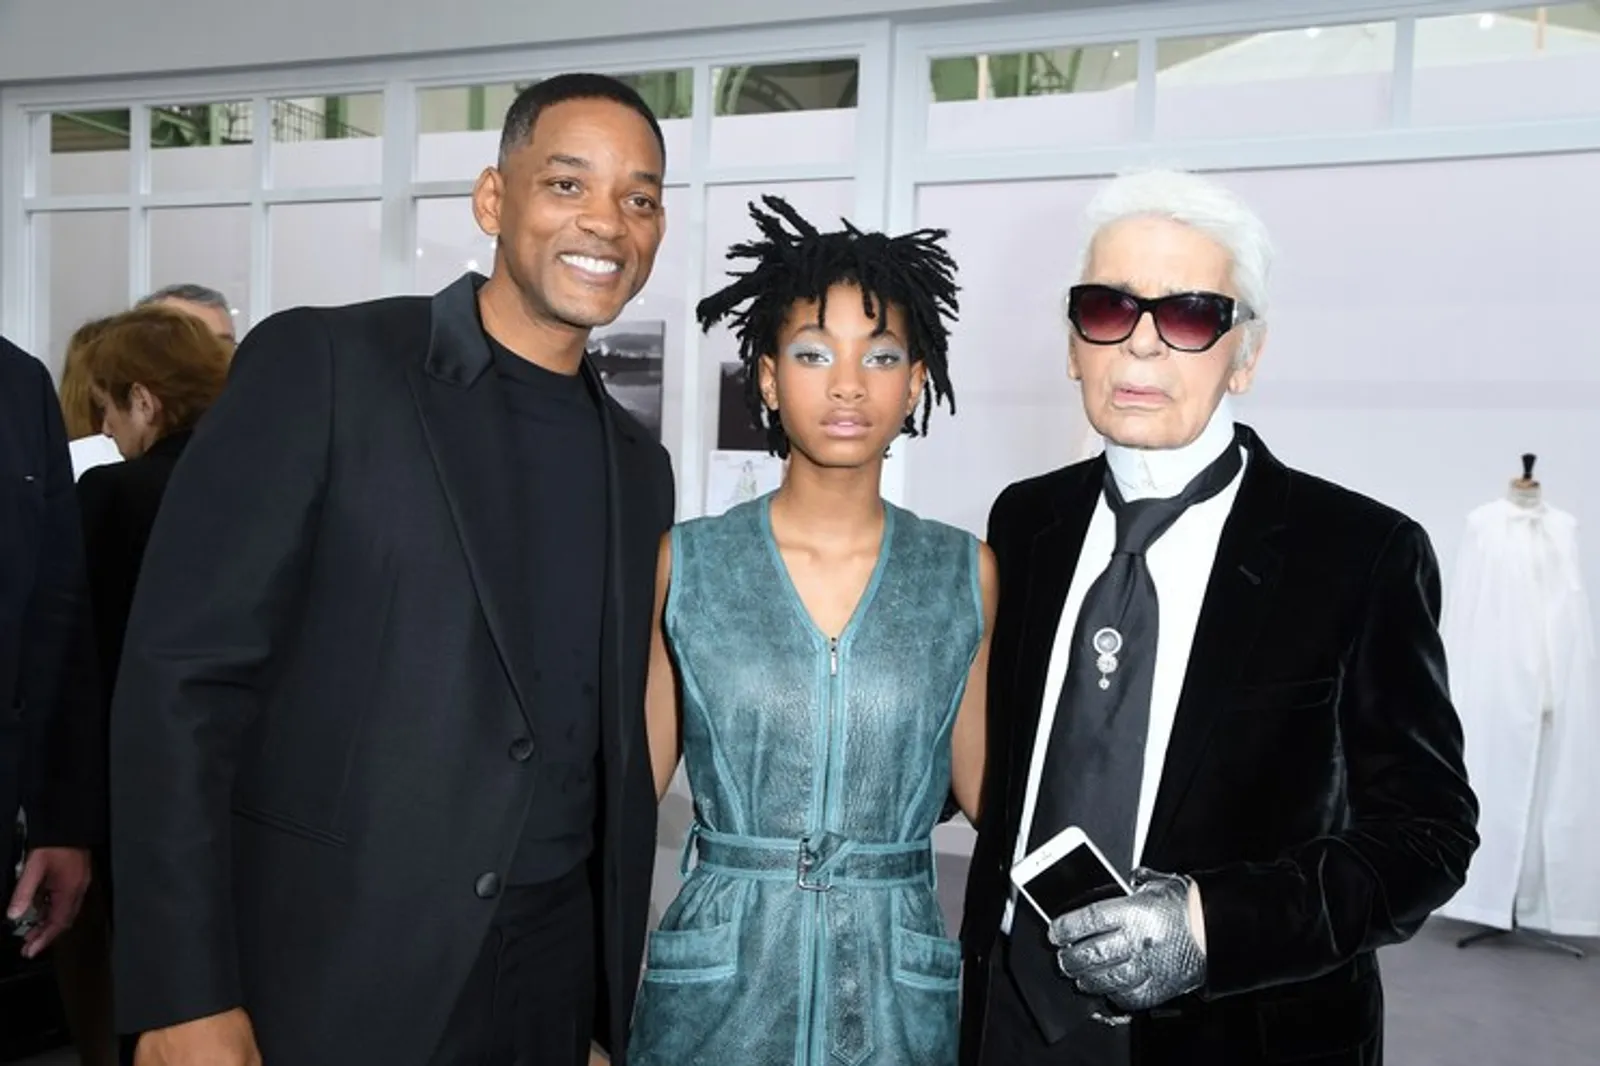 Sweet! Willow Ditemani Will Smith Di Acara Chanel Couture